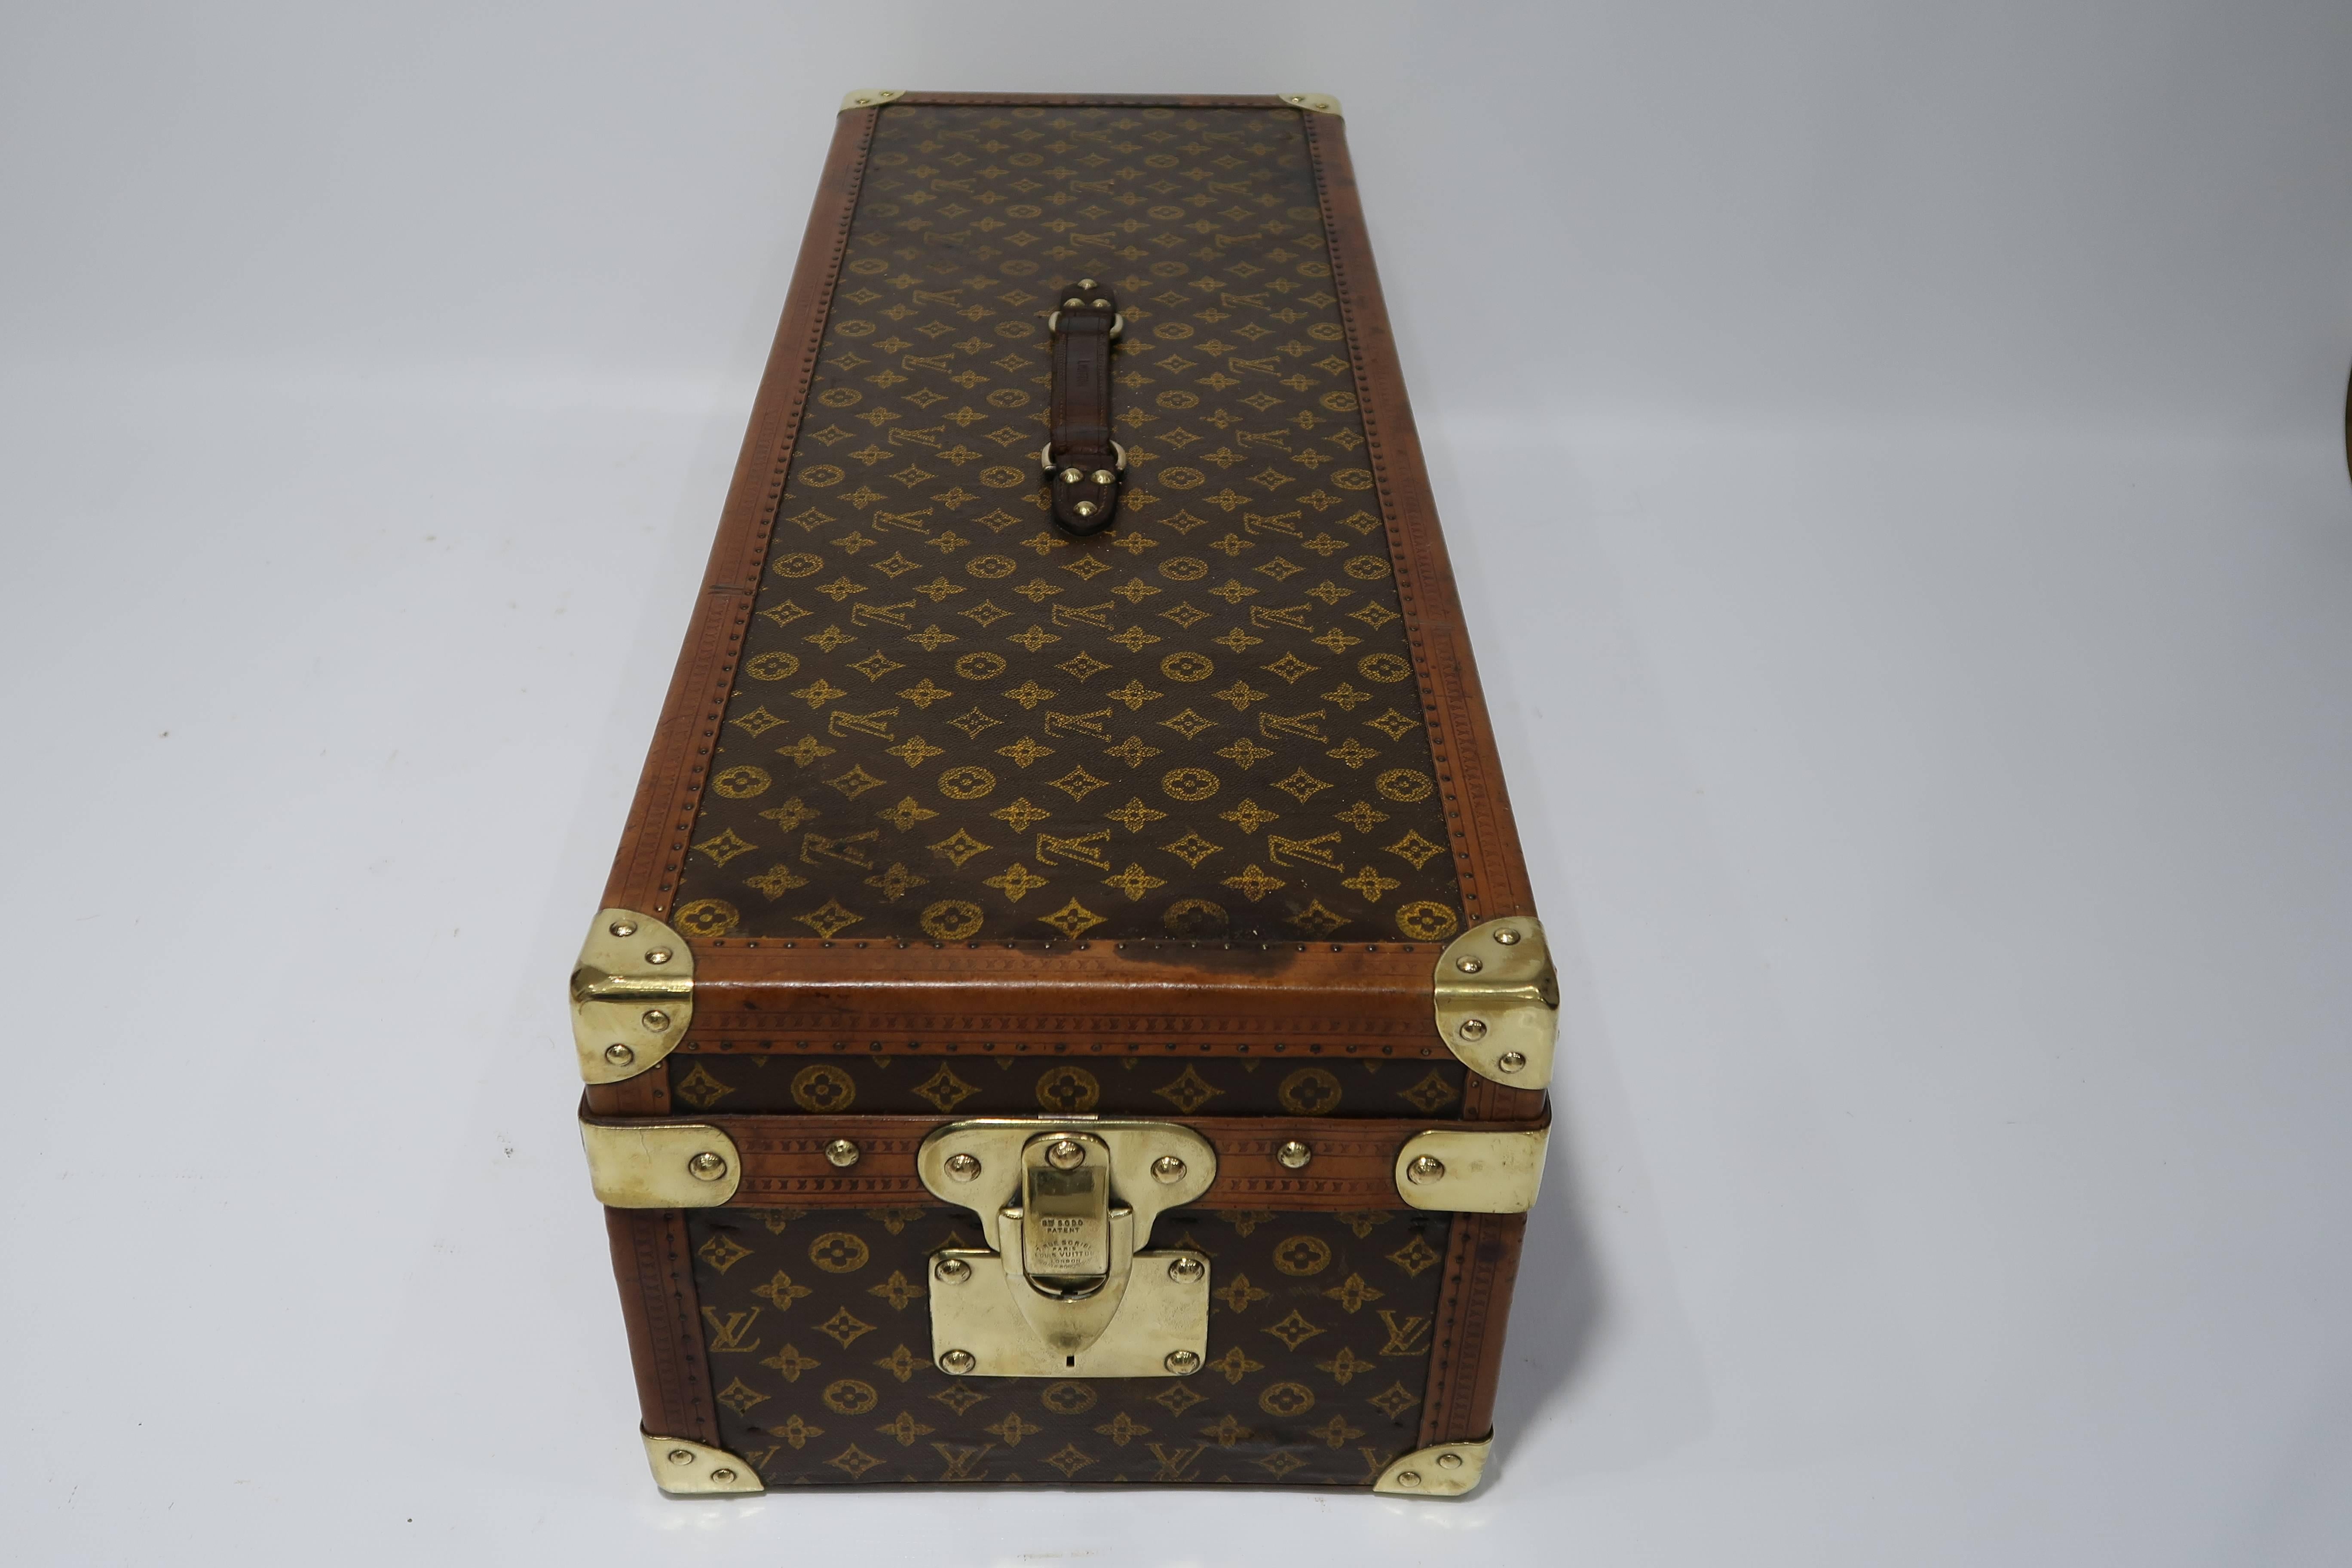 1910 Louis Vuitton Britannica Library Trunk with Complete Britannica Set In Good Condition For Sale In London, GB